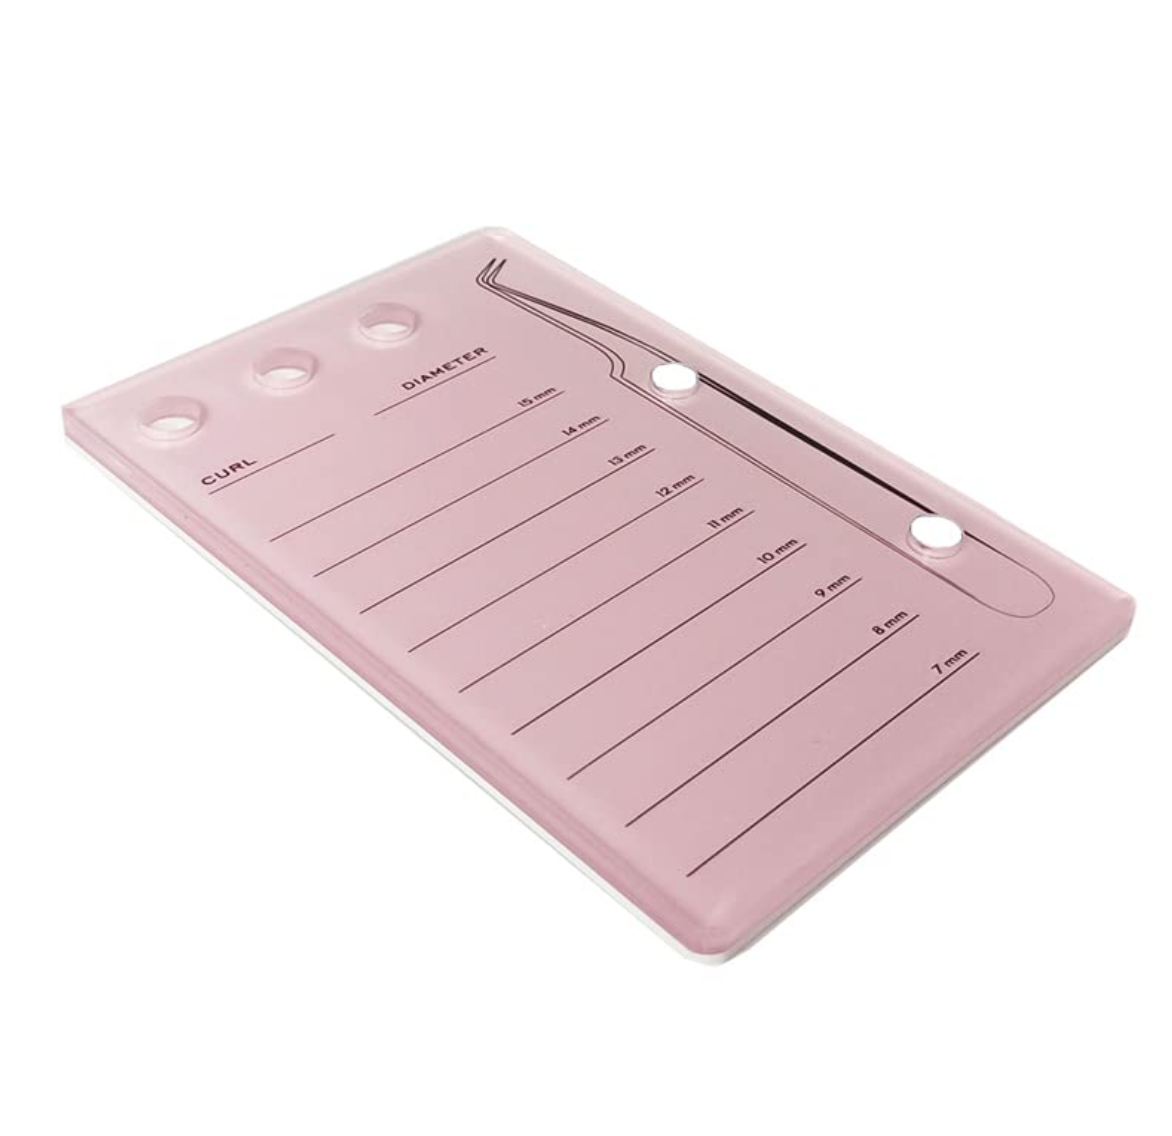 Acrylic Lash Tile, 7-15mm Scale, Glue Cups Holder - Pink